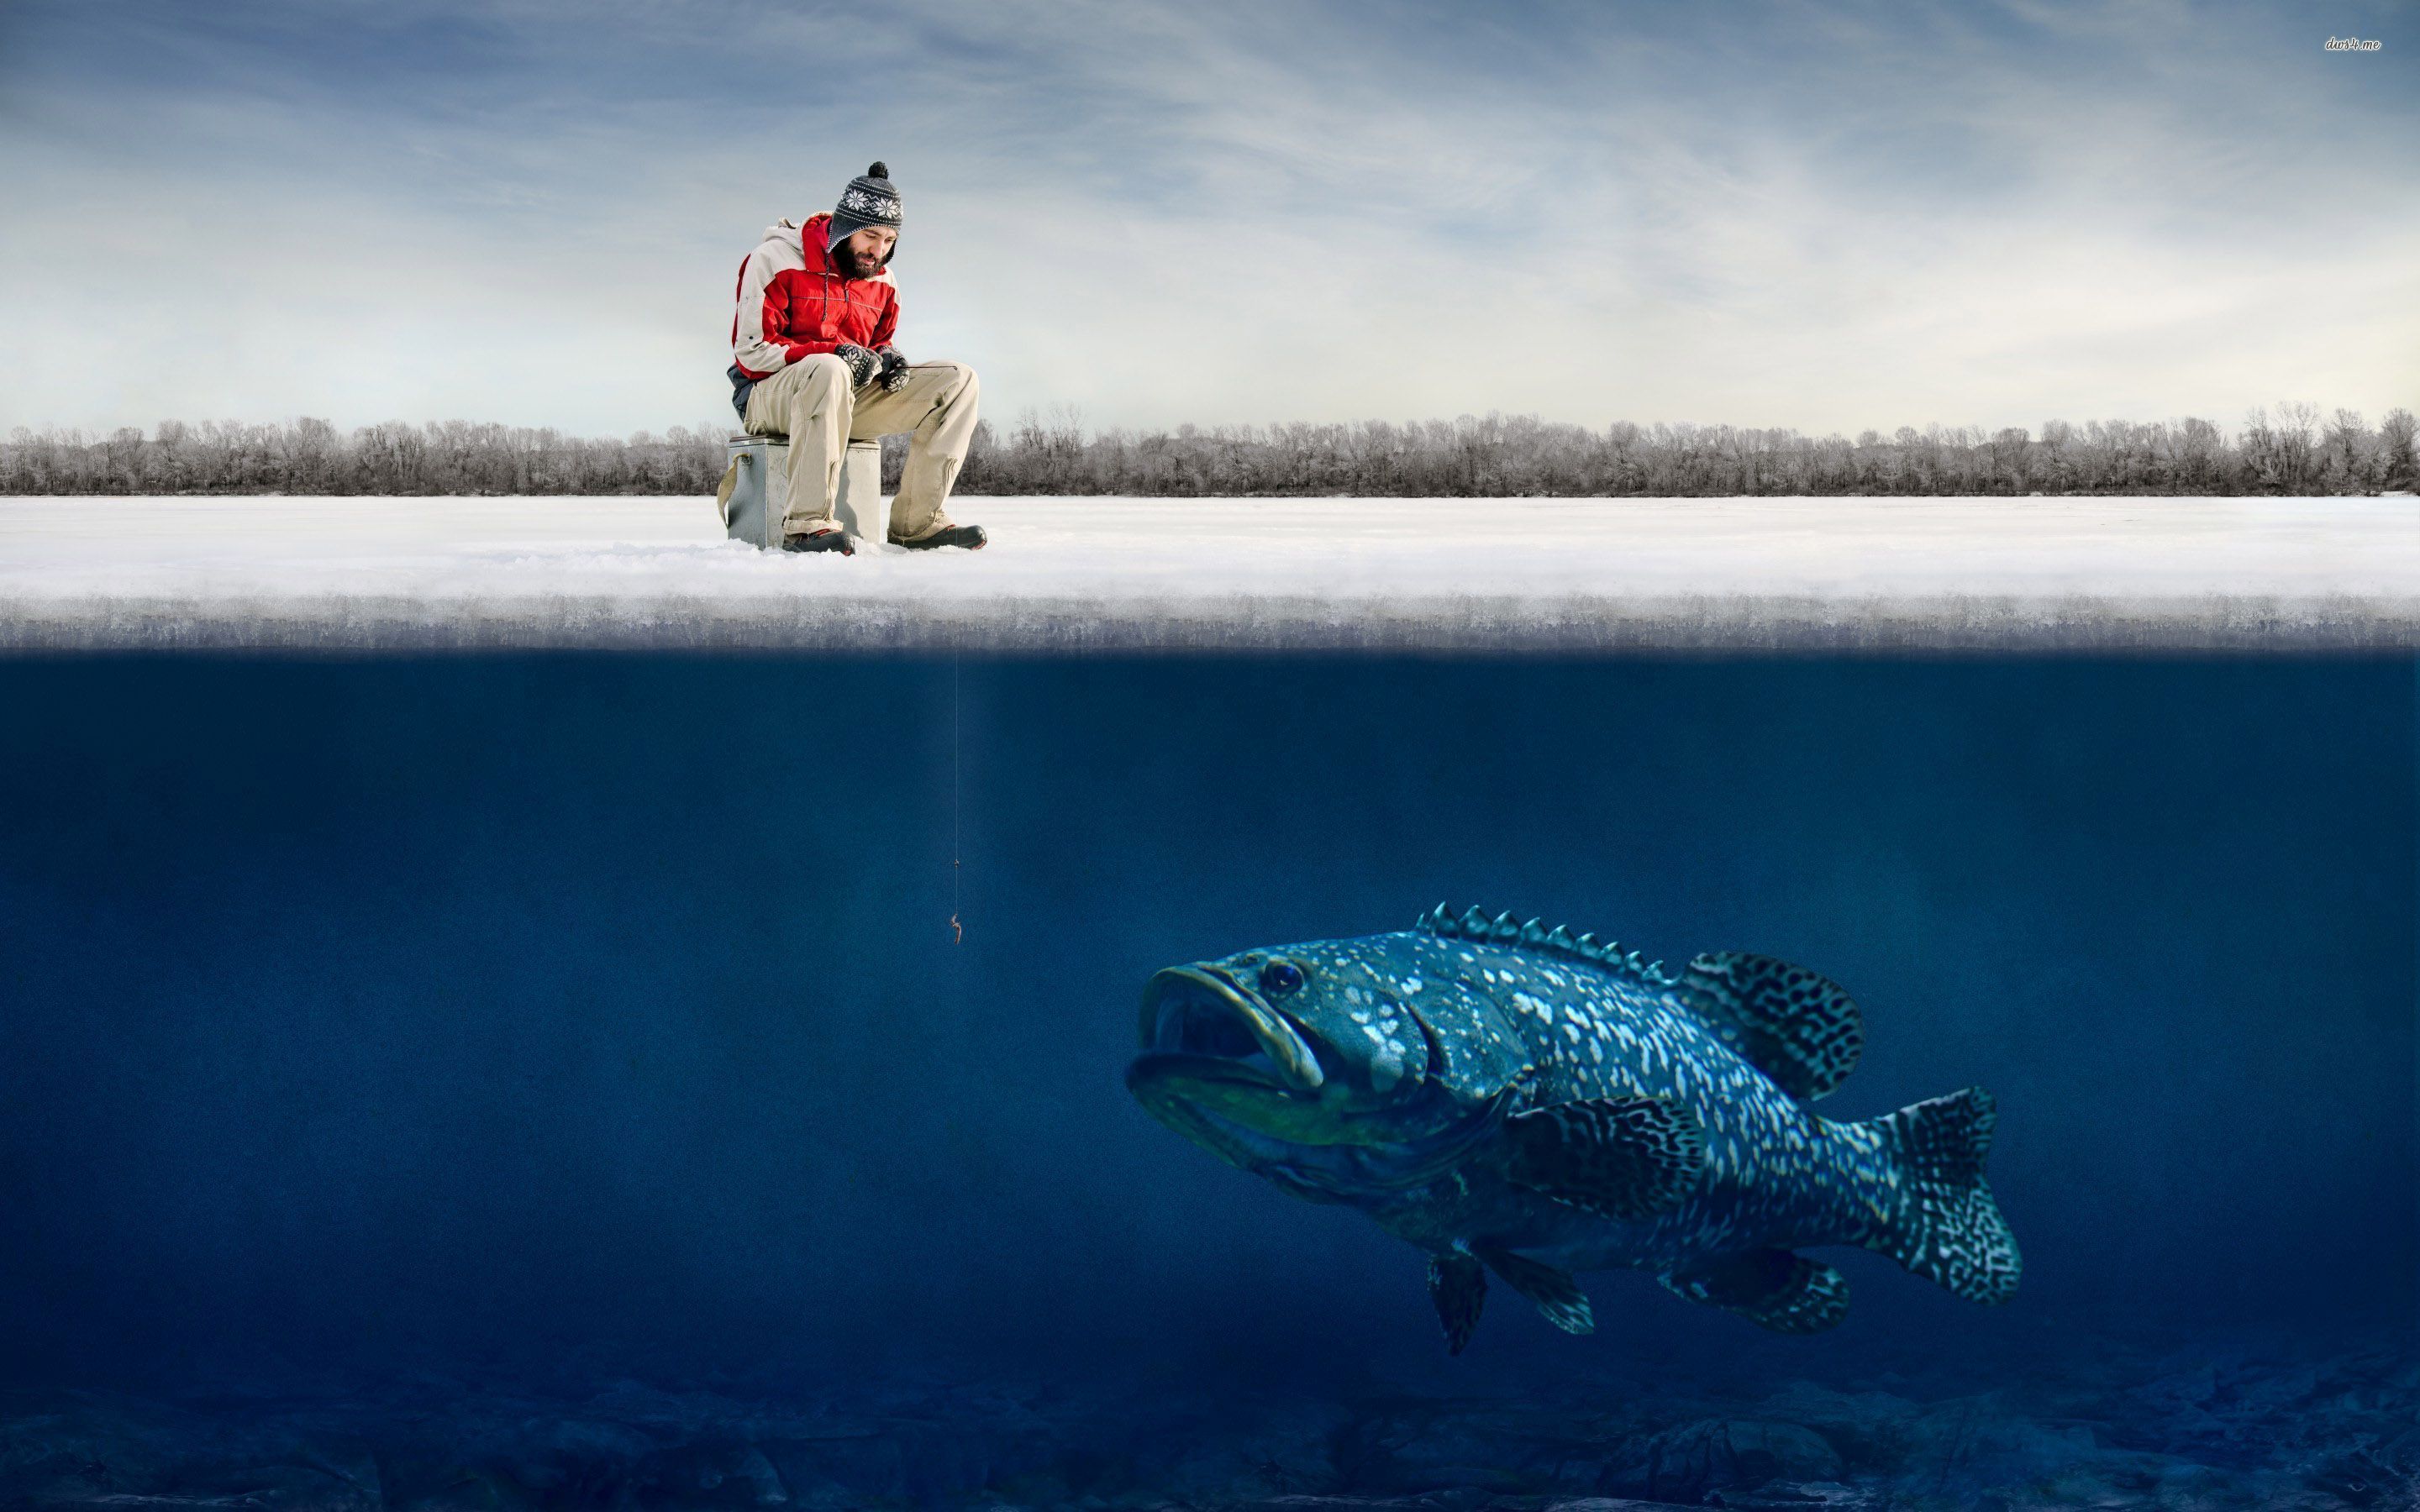 Ice Fishing wallpaper - Artistic wallpapers - #28074